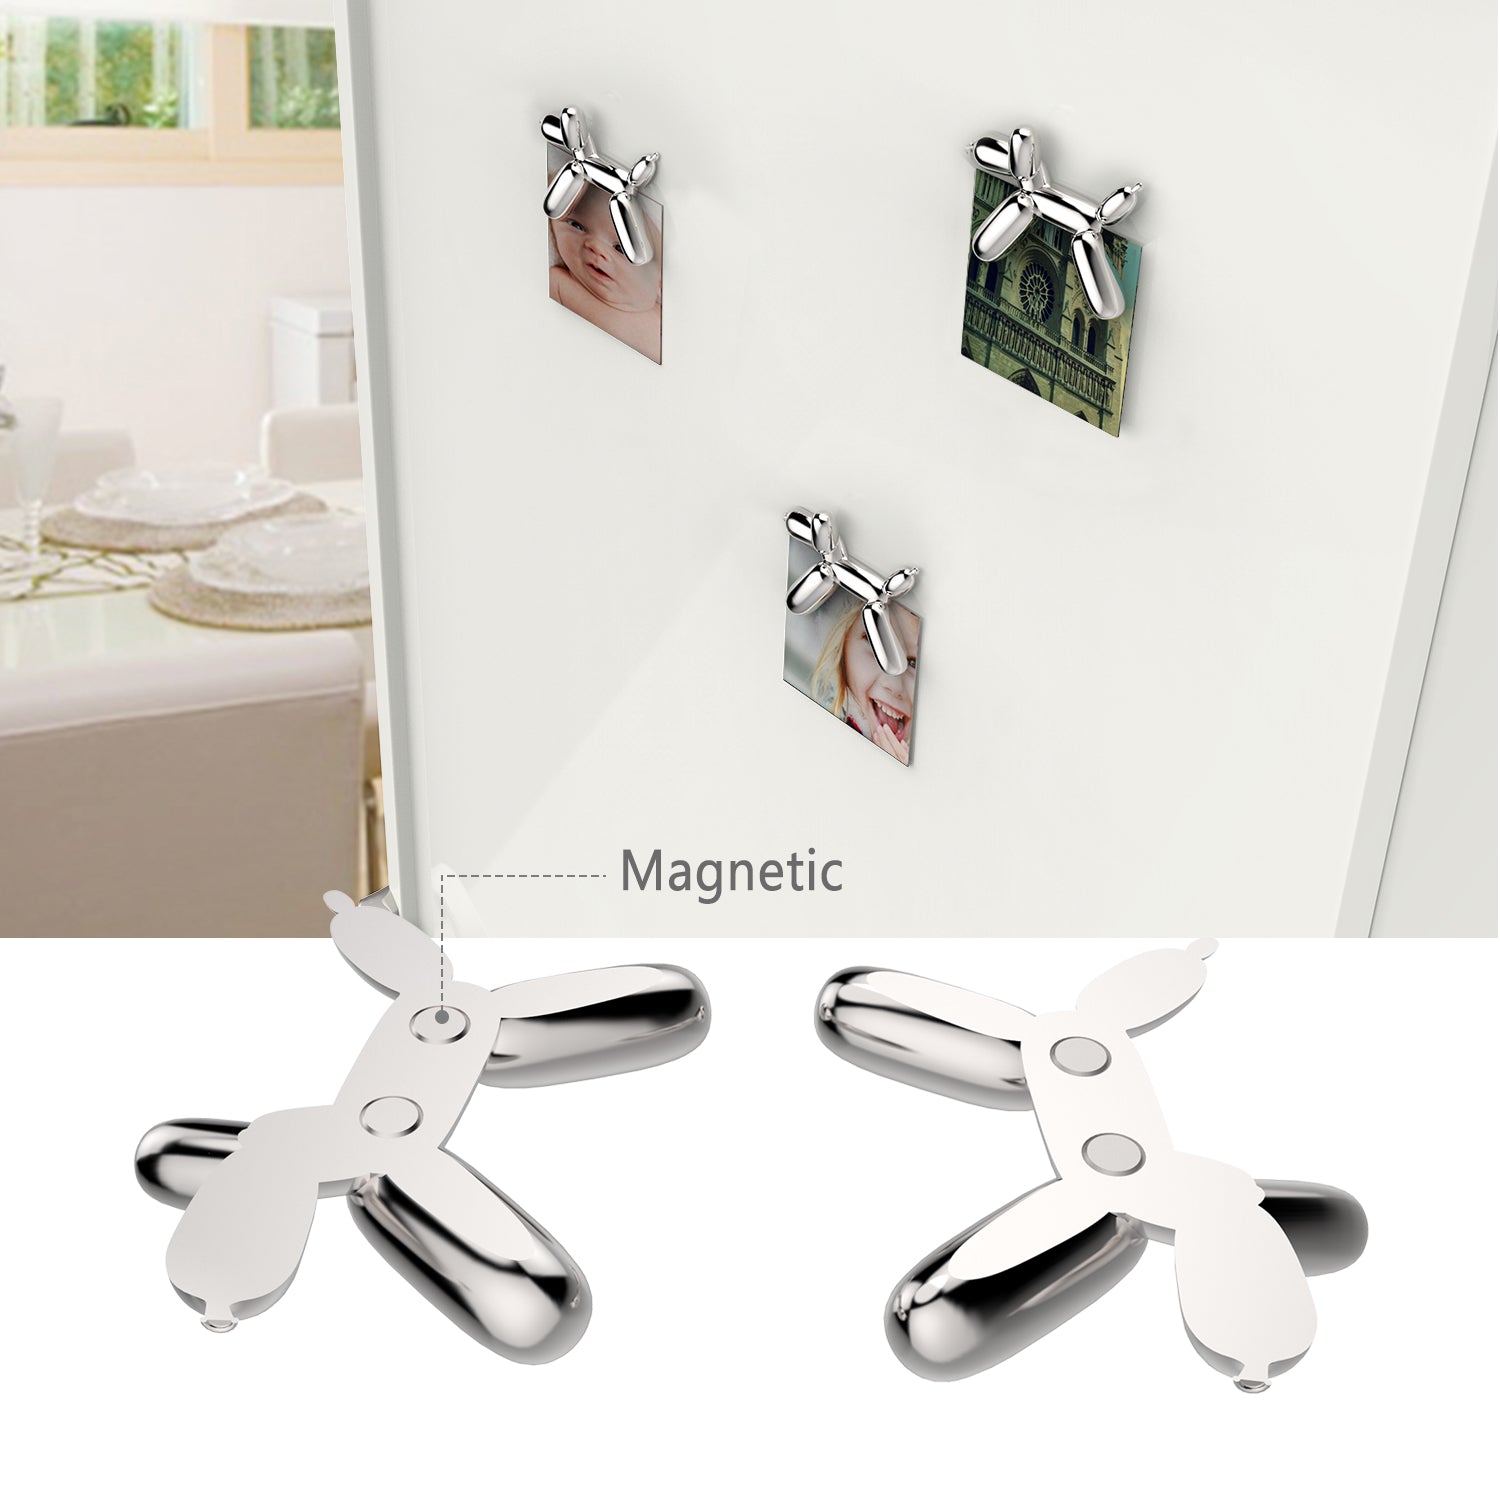 Steti Zinc Alloy Balloon Dog Magnet and Photo Holder, In Silver and Bl –  Steti Inc